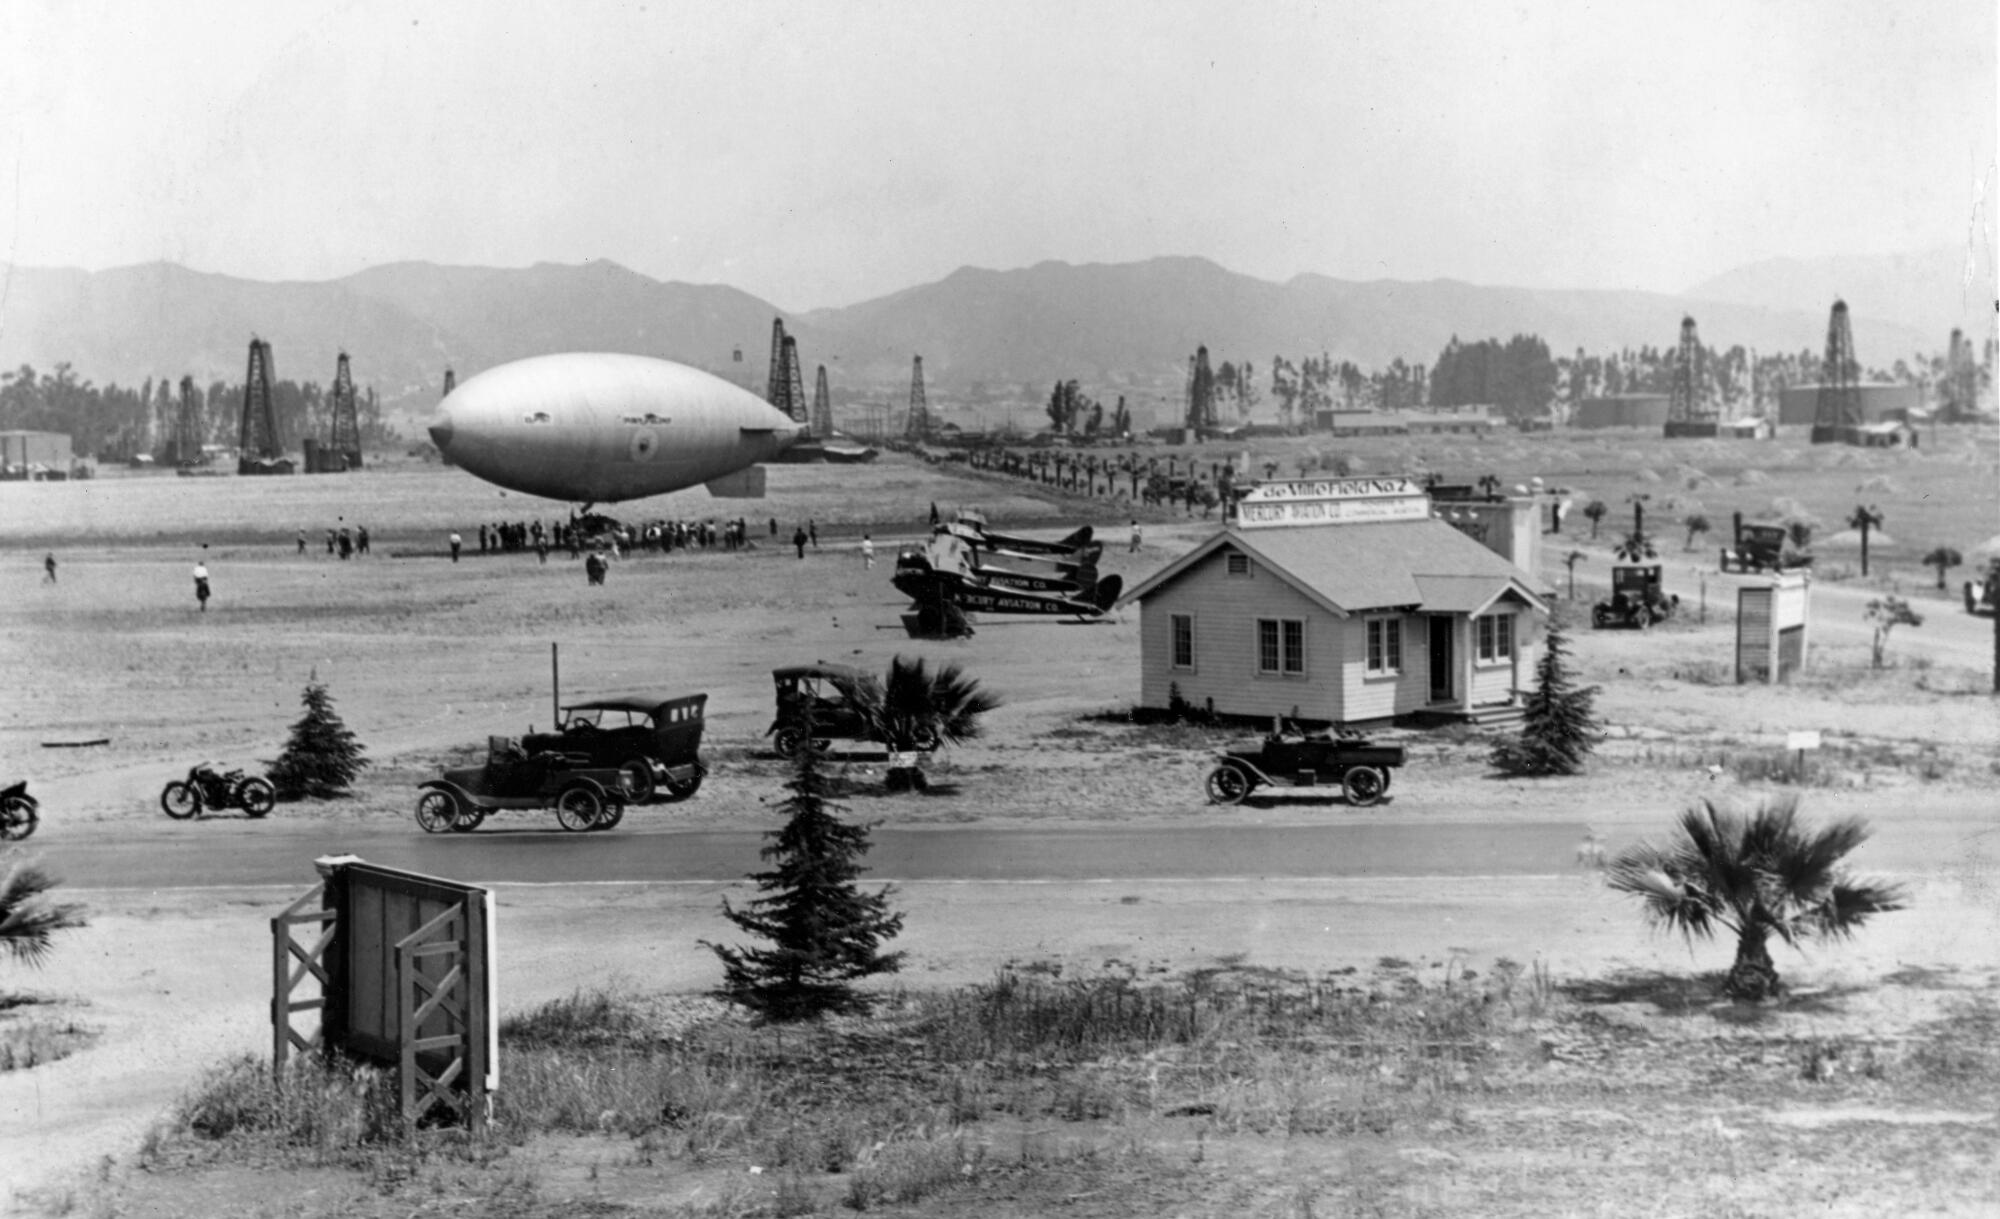 A vintage black and white photo shows a zeppelin in an airfield with oil derricks and mountains in the background